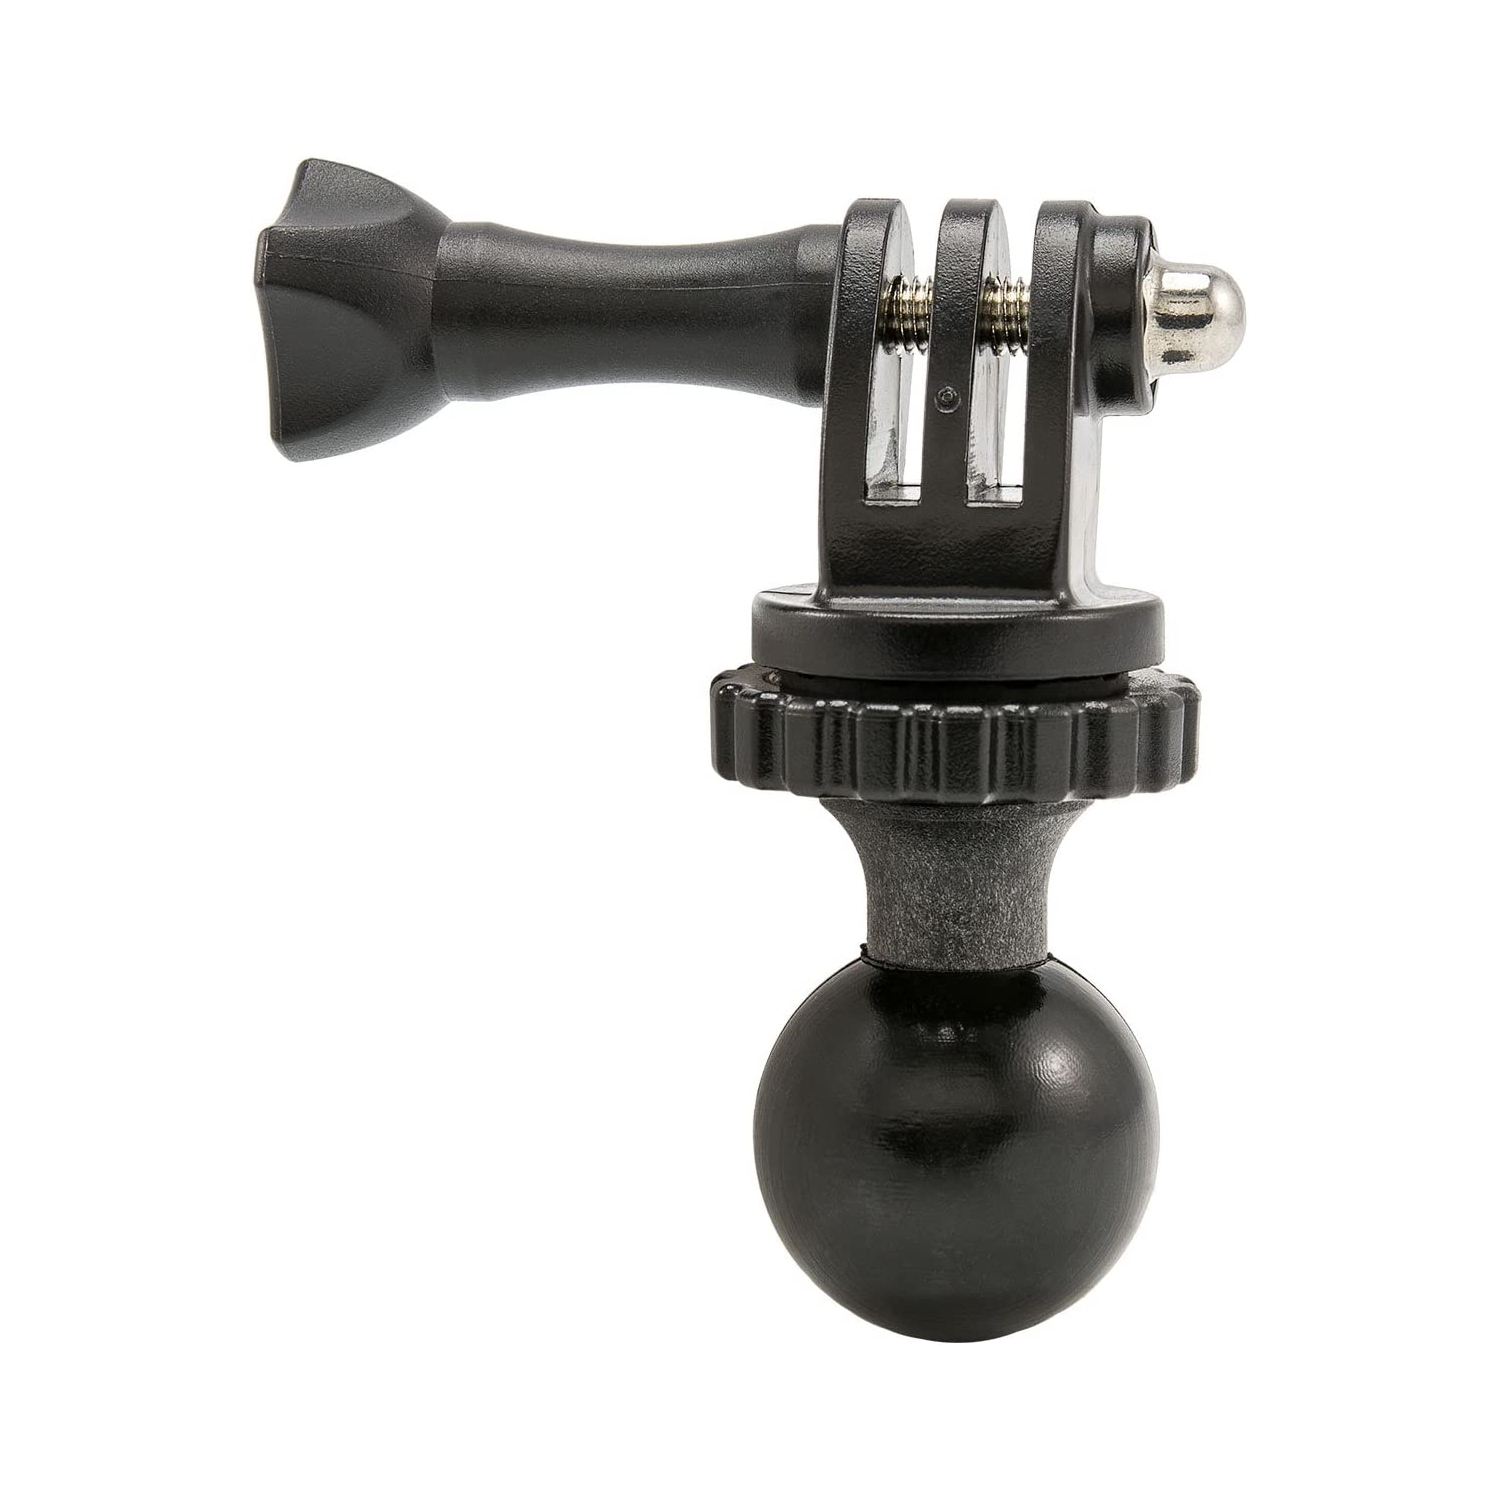 SP25MMGP 25mm Swivel Ball to GoPro HERO3-Plus/3/2 Lateral Prong Pattern Adapter